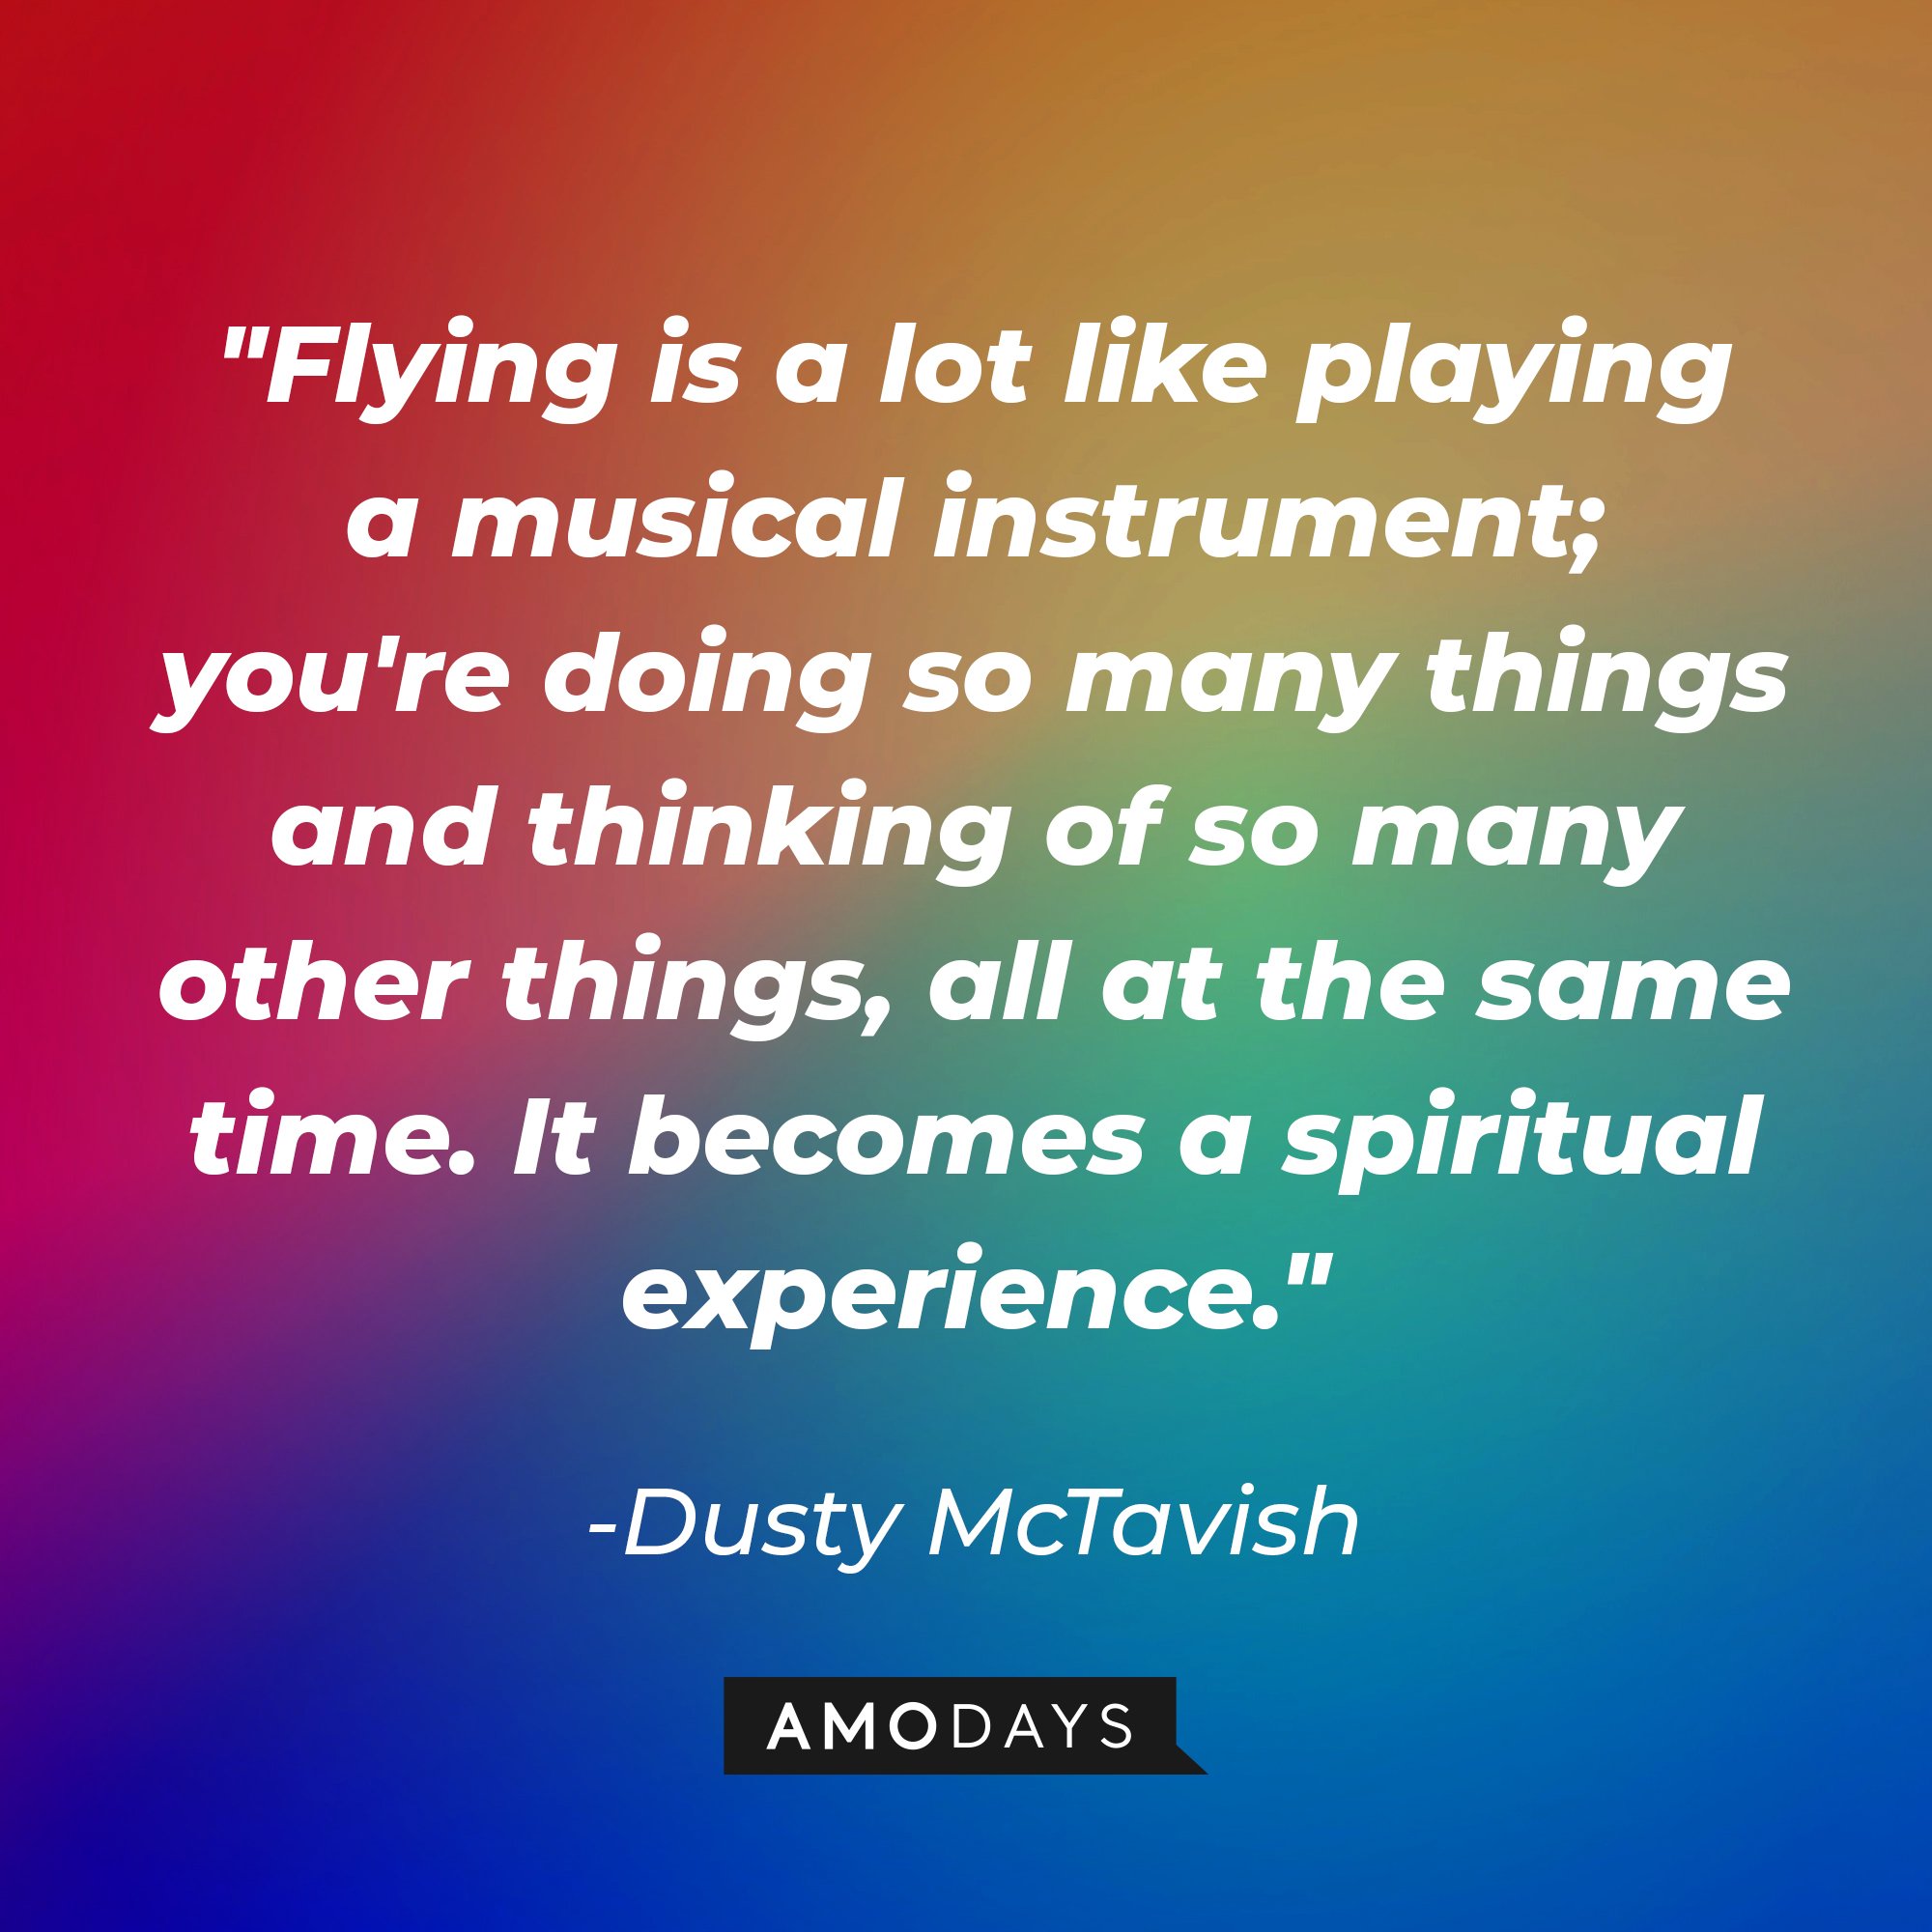 Dusty McTavish’s quote: "Flying is a lot like playing a musical instrument; you're doing so many things and thinking of so many other things, all at the same time. It becomes a spiritual experience."  | Image: AmoDays